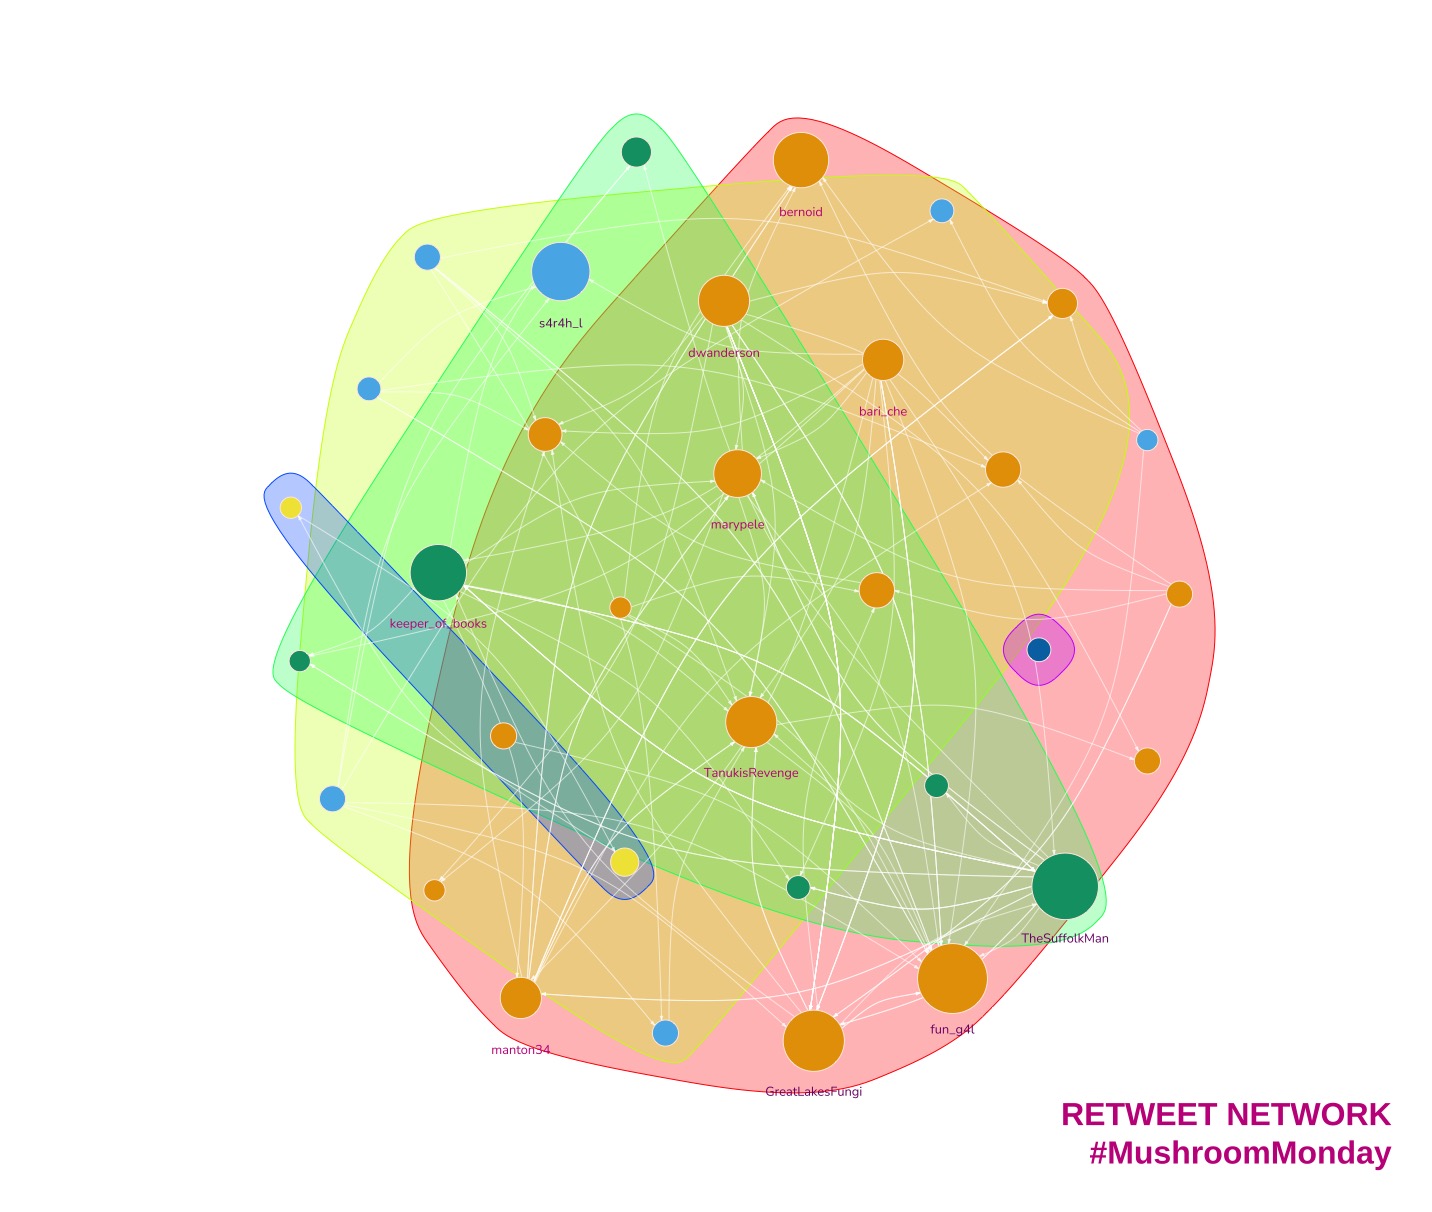 Twitter network graph with communities